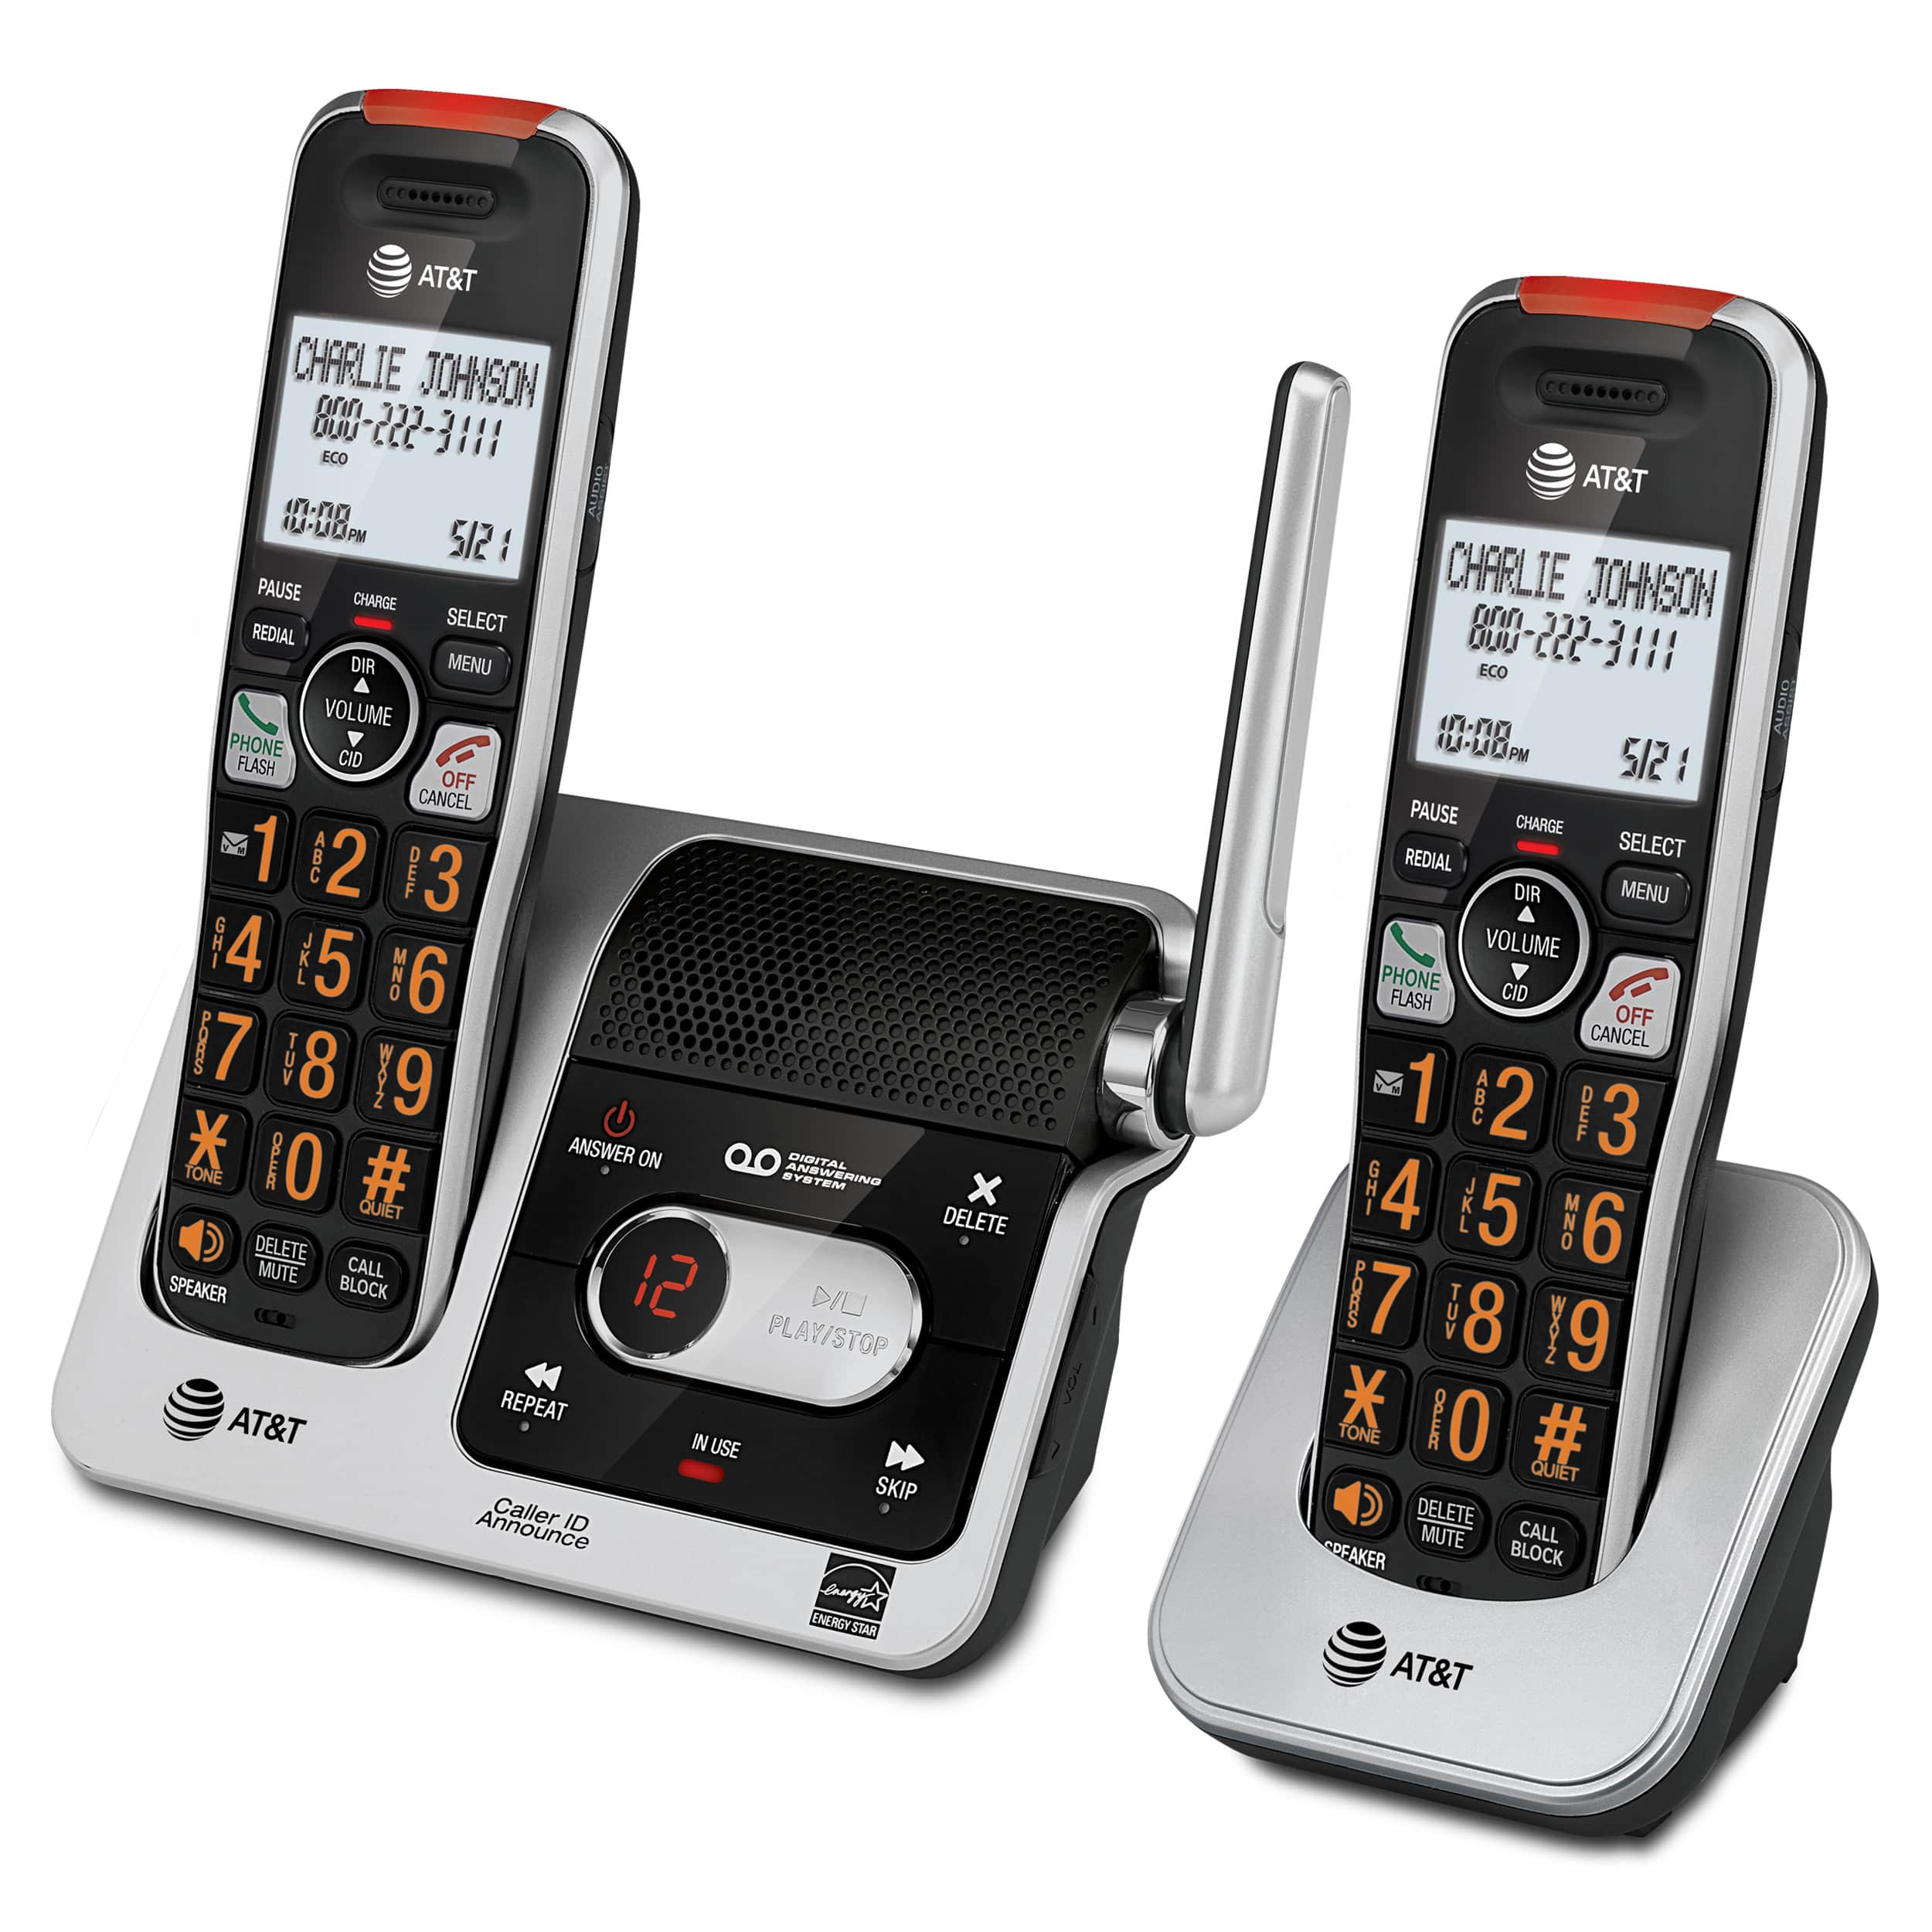 2-Handset Cordless Phone with Unsurpassed Range, Smart Call Blocker and Answering System - view 8